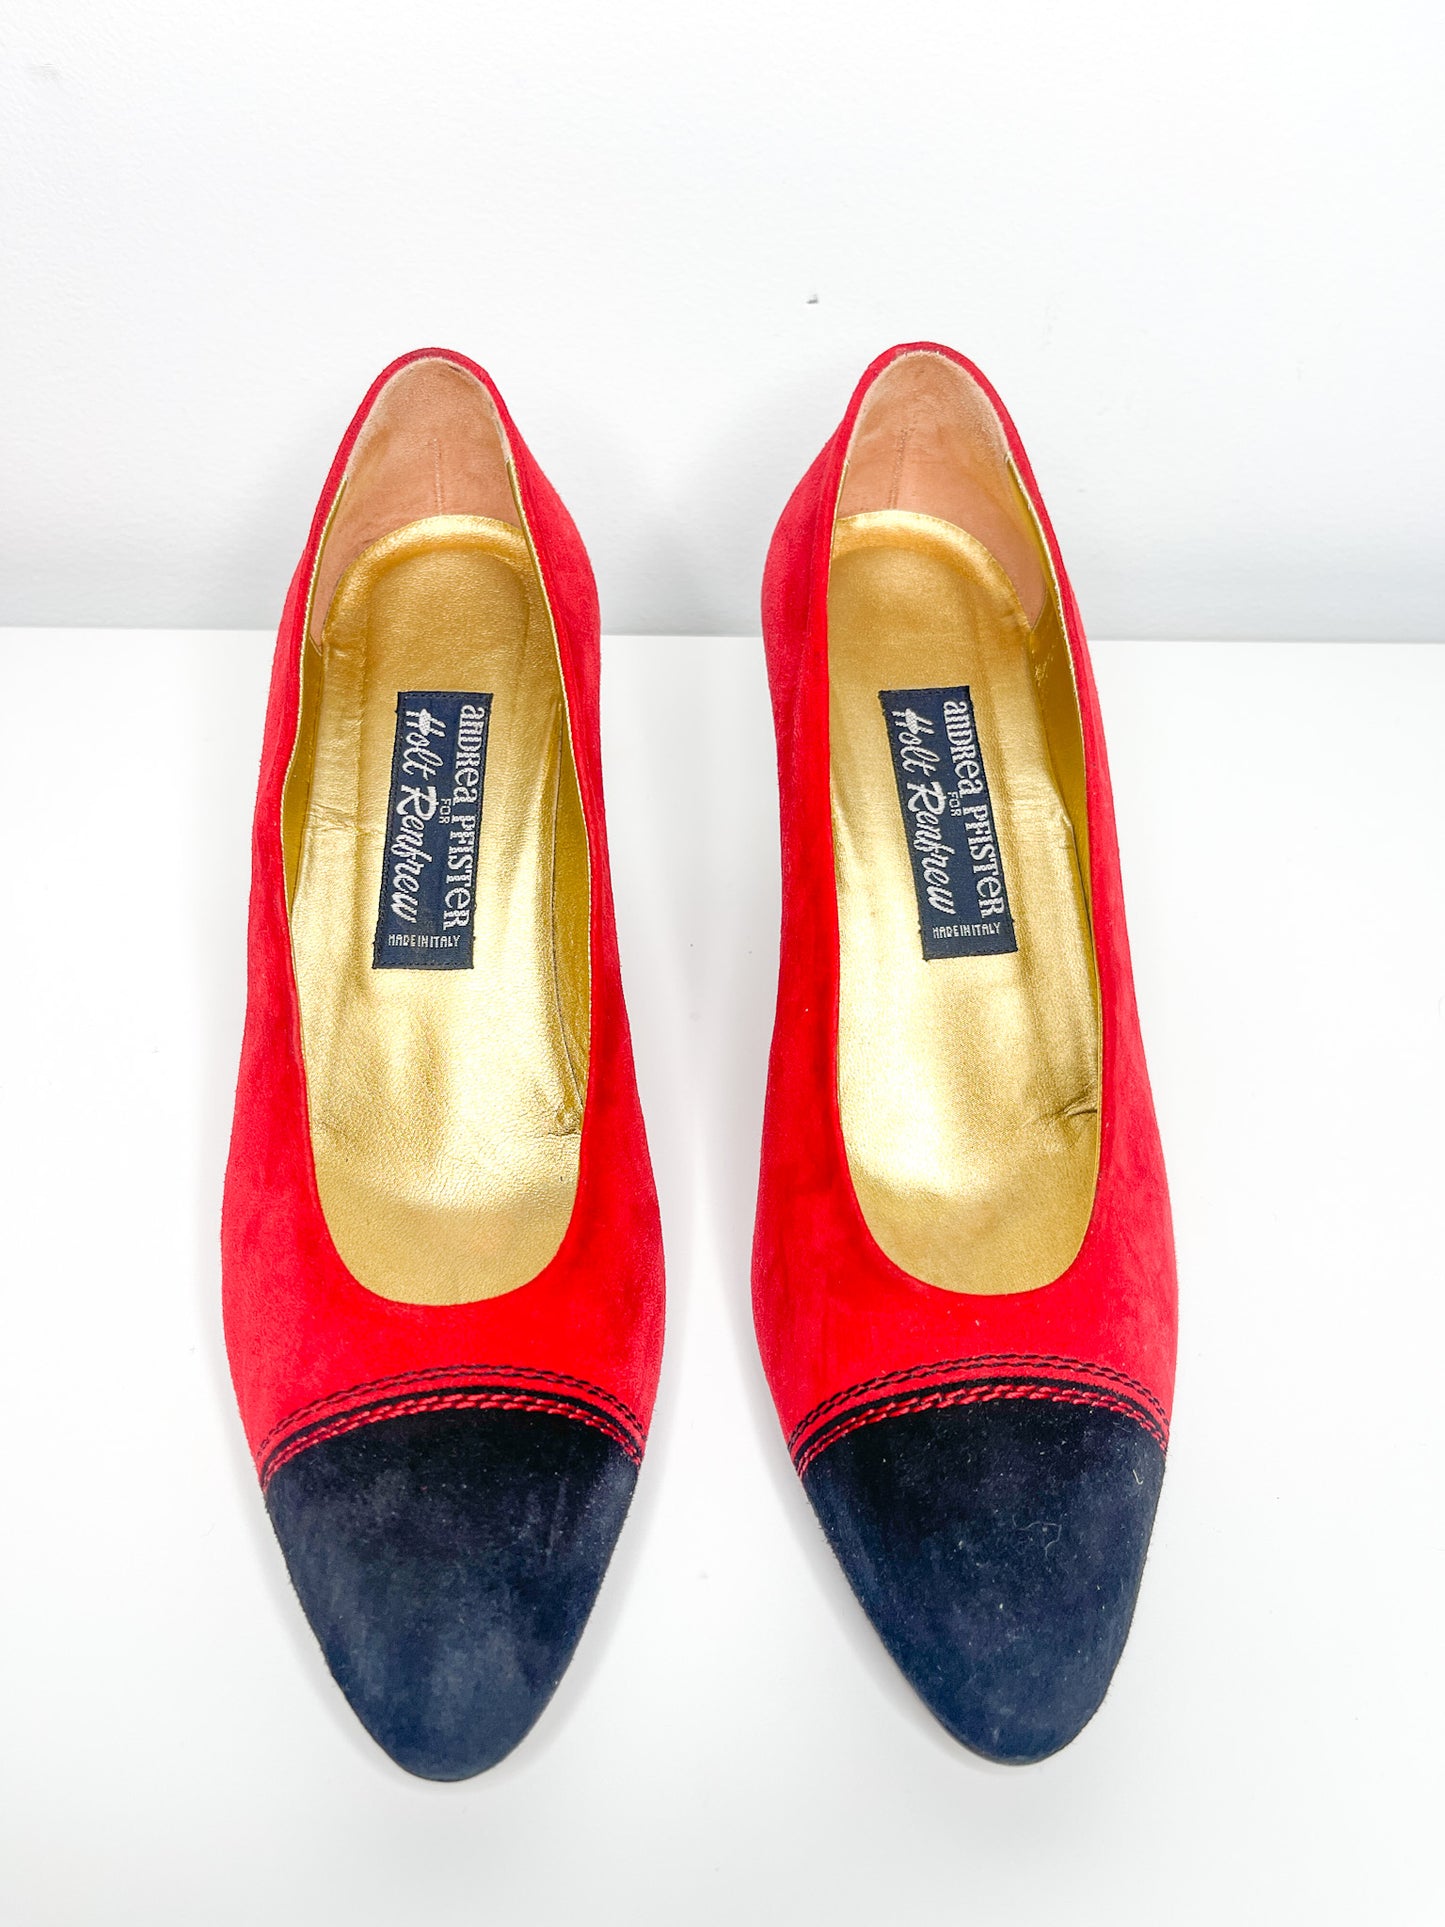 Vintage Andrea Pfister for Holt Renfrew | 1980s Red Ladies Shoes|Made In Italy Shoes| Red Shoes |Vintage Luxury Shoes| Lightly Used Shoes